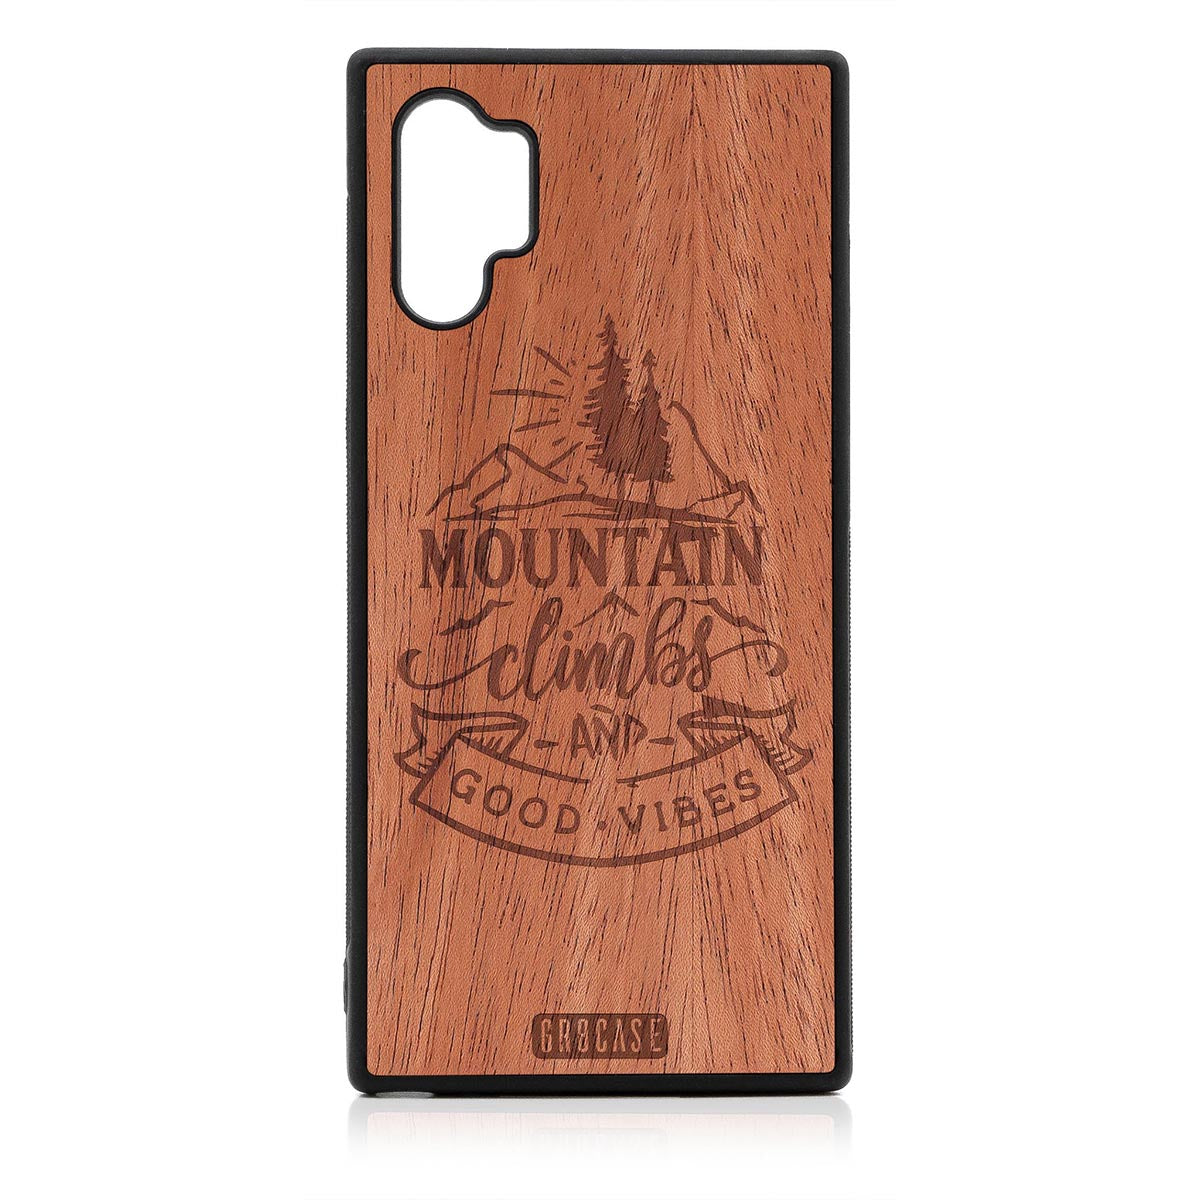 Mountain Climbs And Good Vibes Design Wood Case Samsung Galaxy Note 10 Plus by GR8CASE